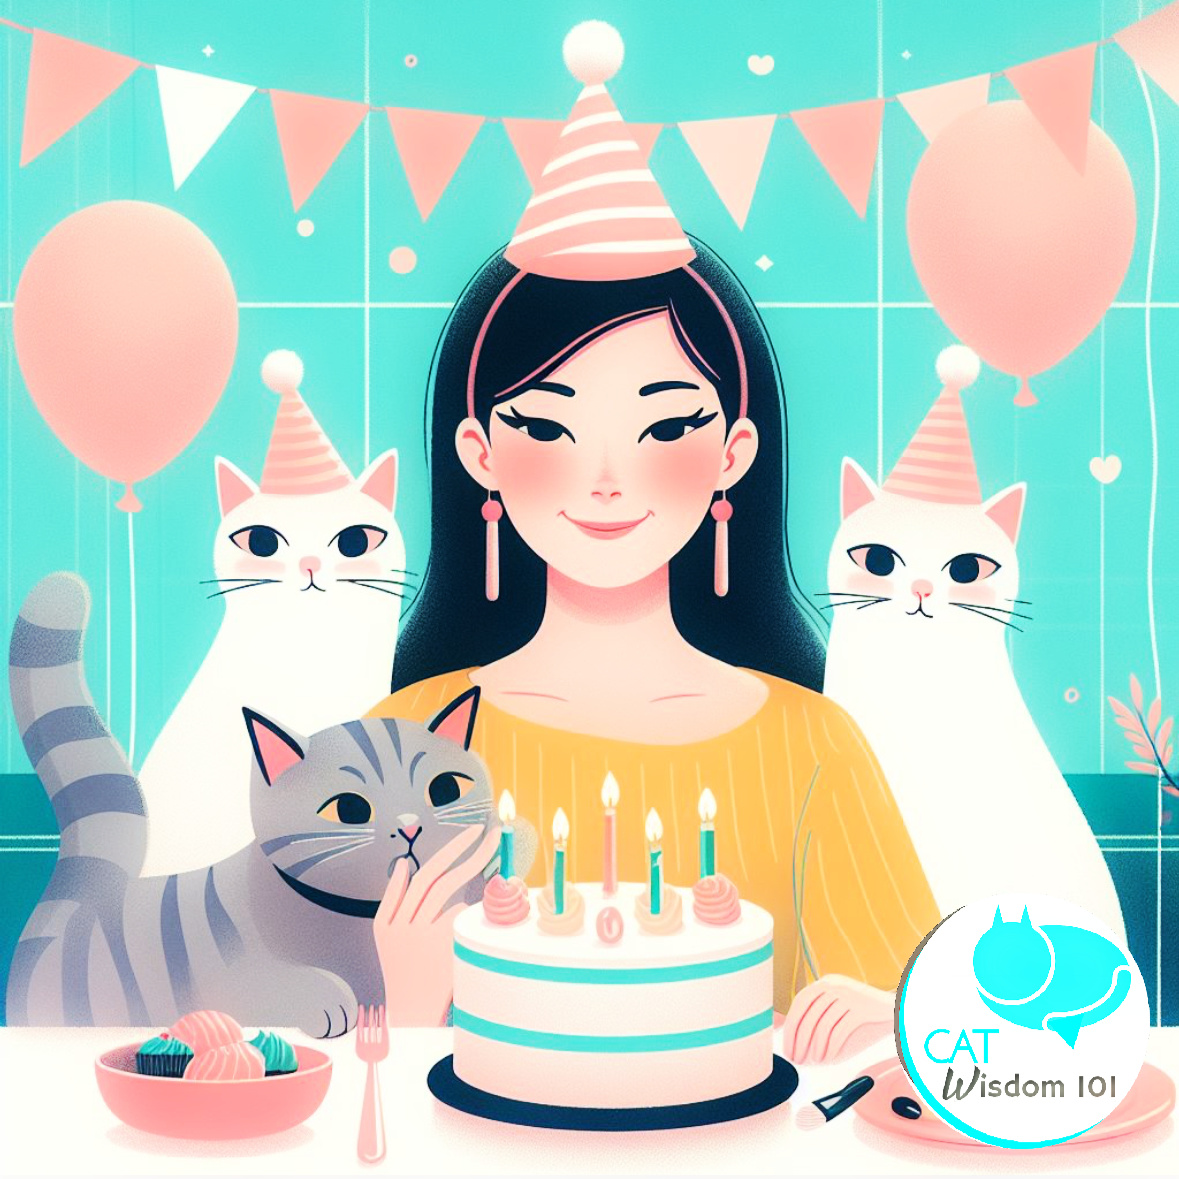 Get creative! This would make a fun cat lady birthday card.